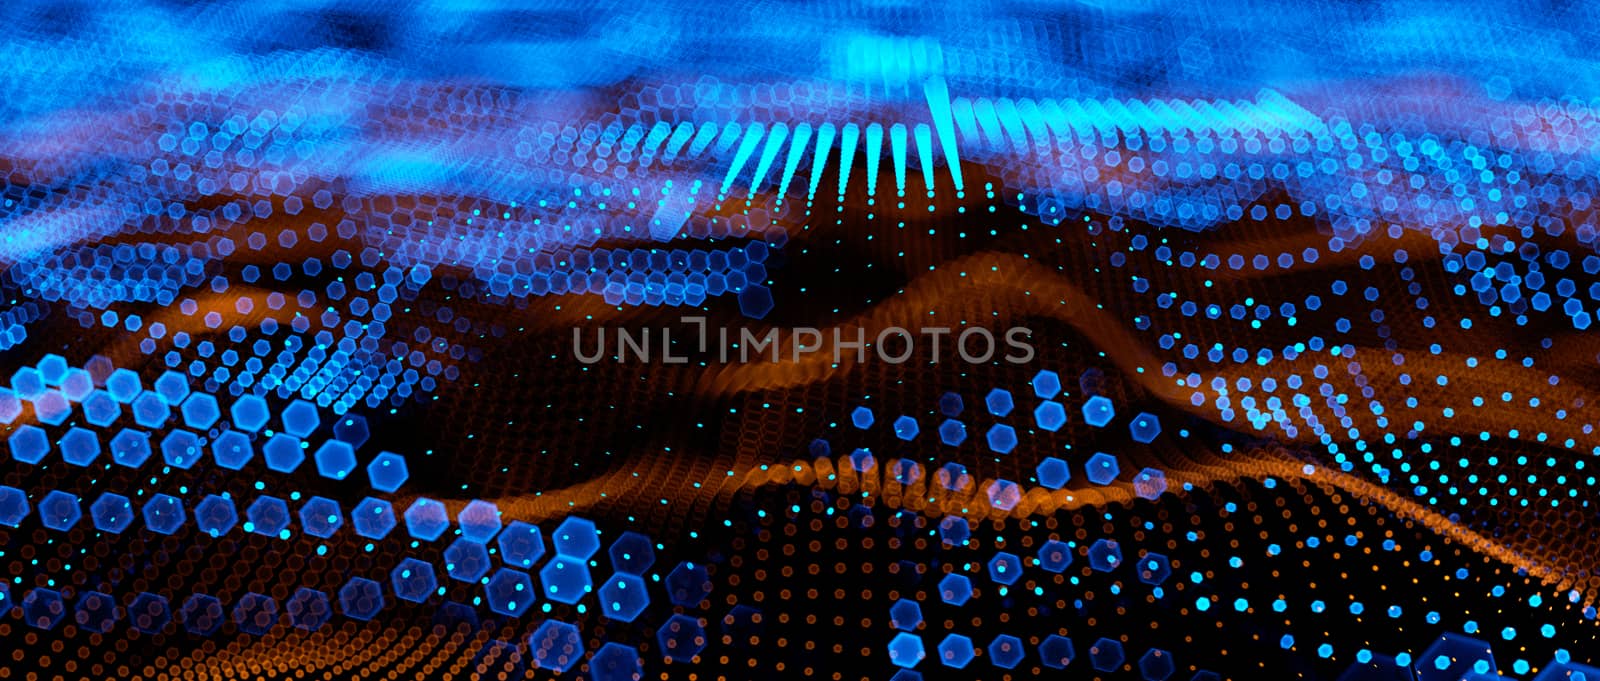 Abstract big data futuristic light wallpaper background design. Science dark pattern with structure mesh and circles. Modern business space dots illustration. 3D render